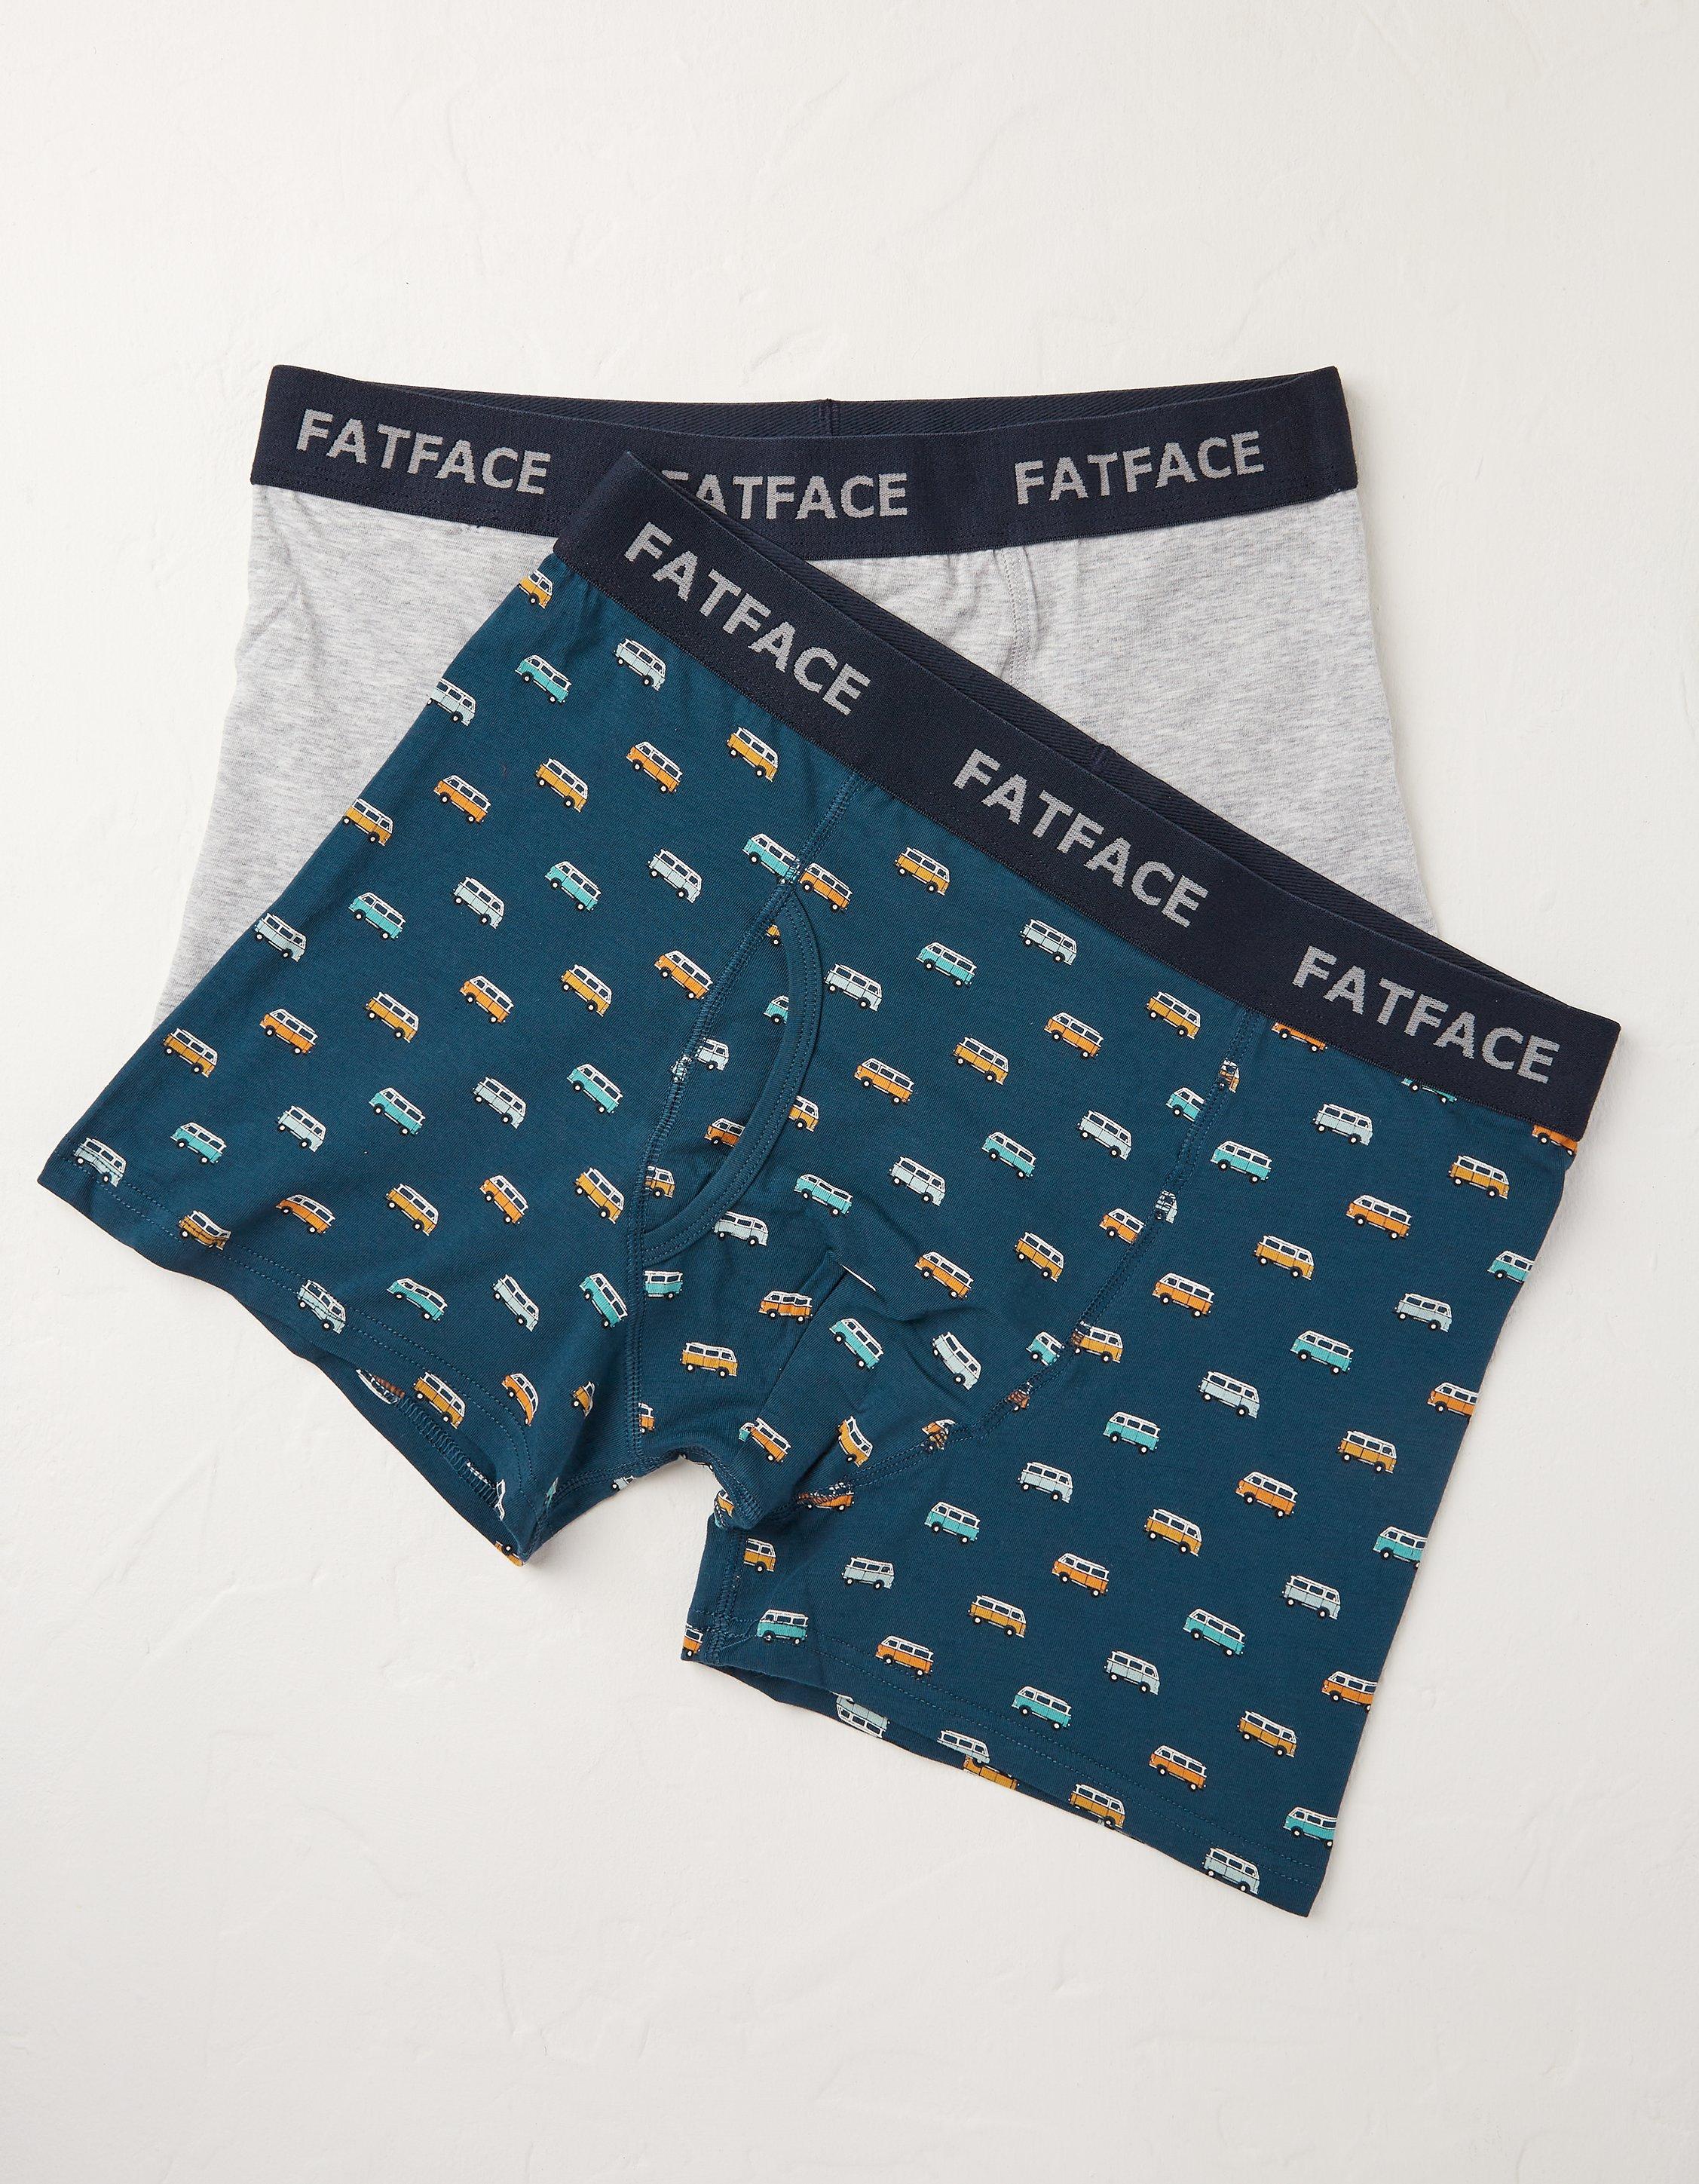 https://media.fatface.com/i/Fat_Face/980306_Teal_Flat_Front_1?%24pdp-primary-lge%24&fmt=auto